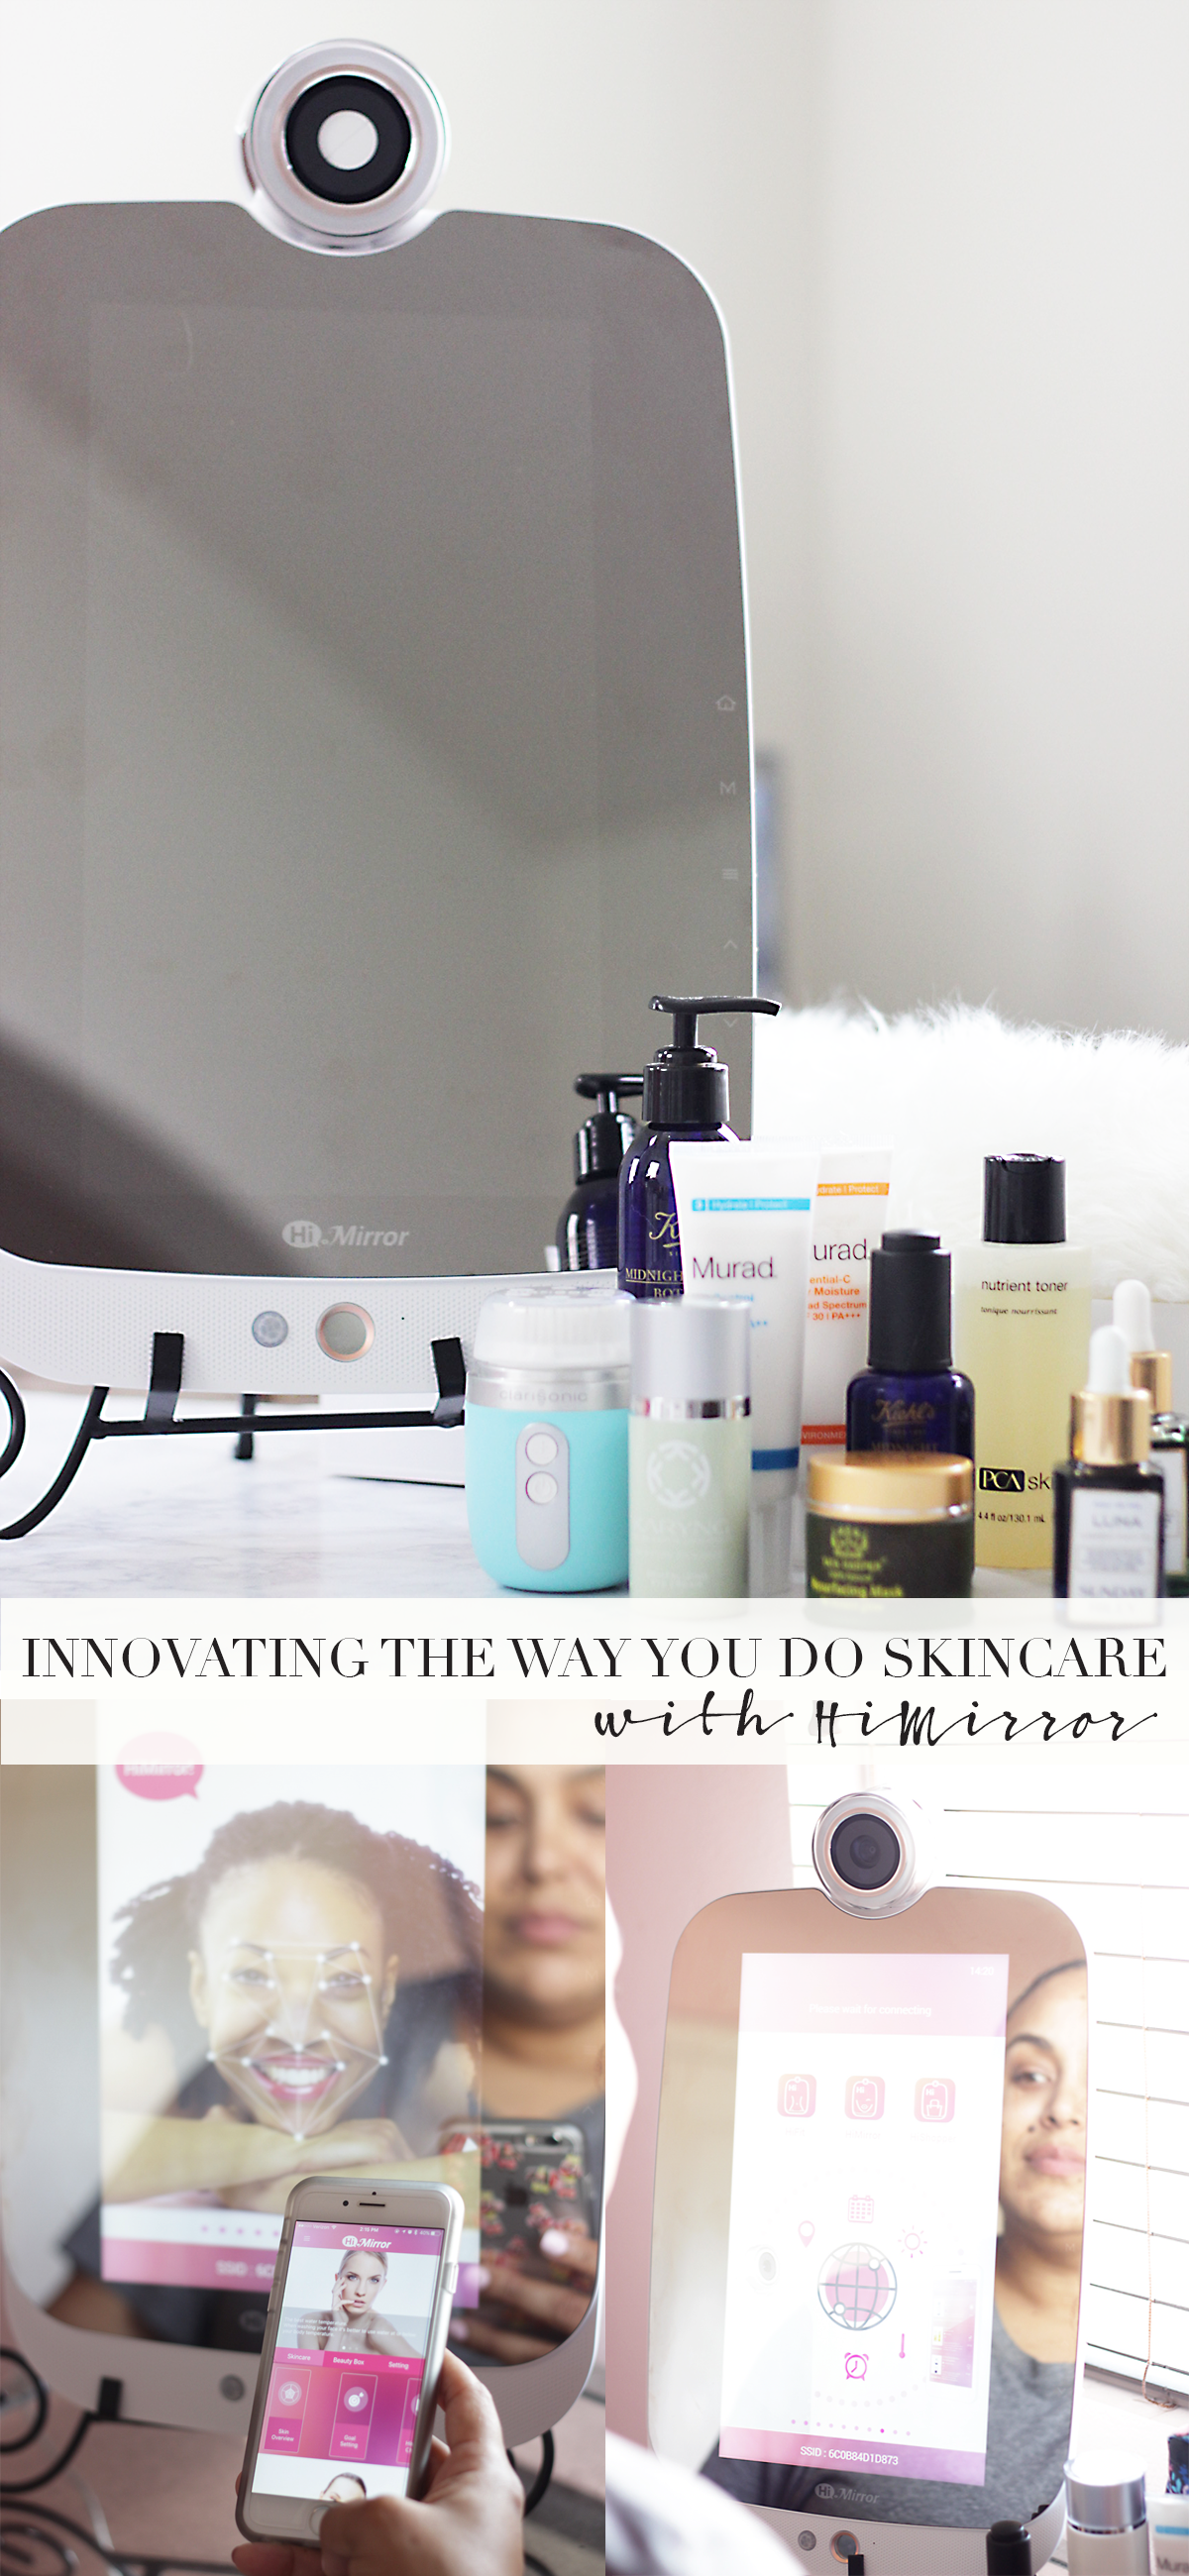 himirror-innovating-the-way-you-do-skincare